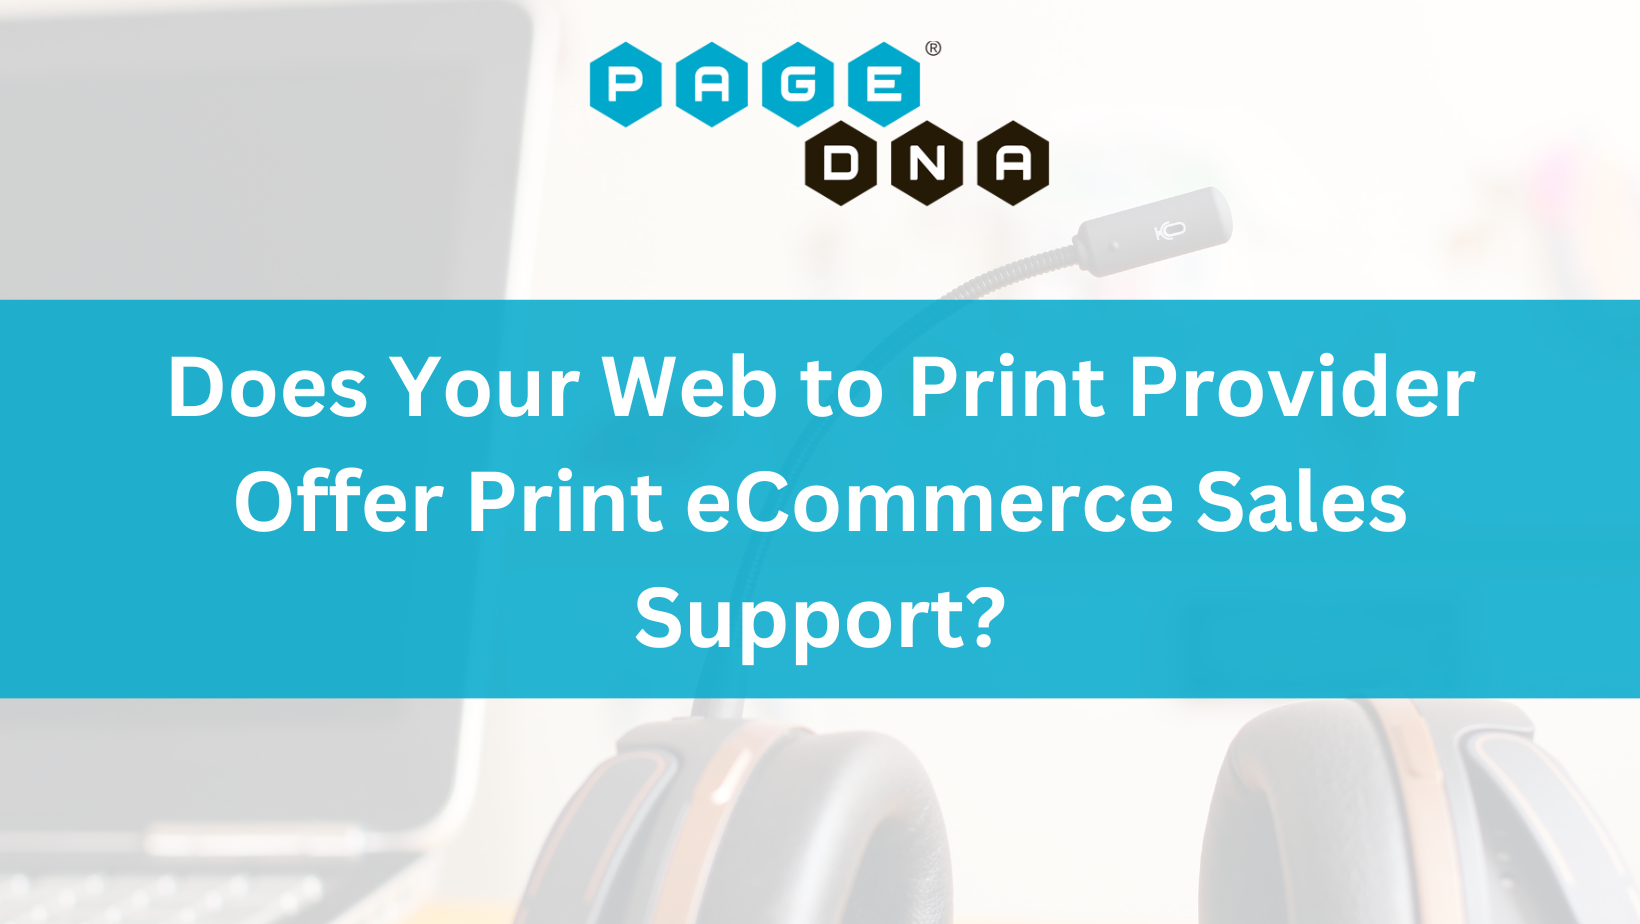 Does Your Web to Print Provider Offer Print eCommerce Sales Support?